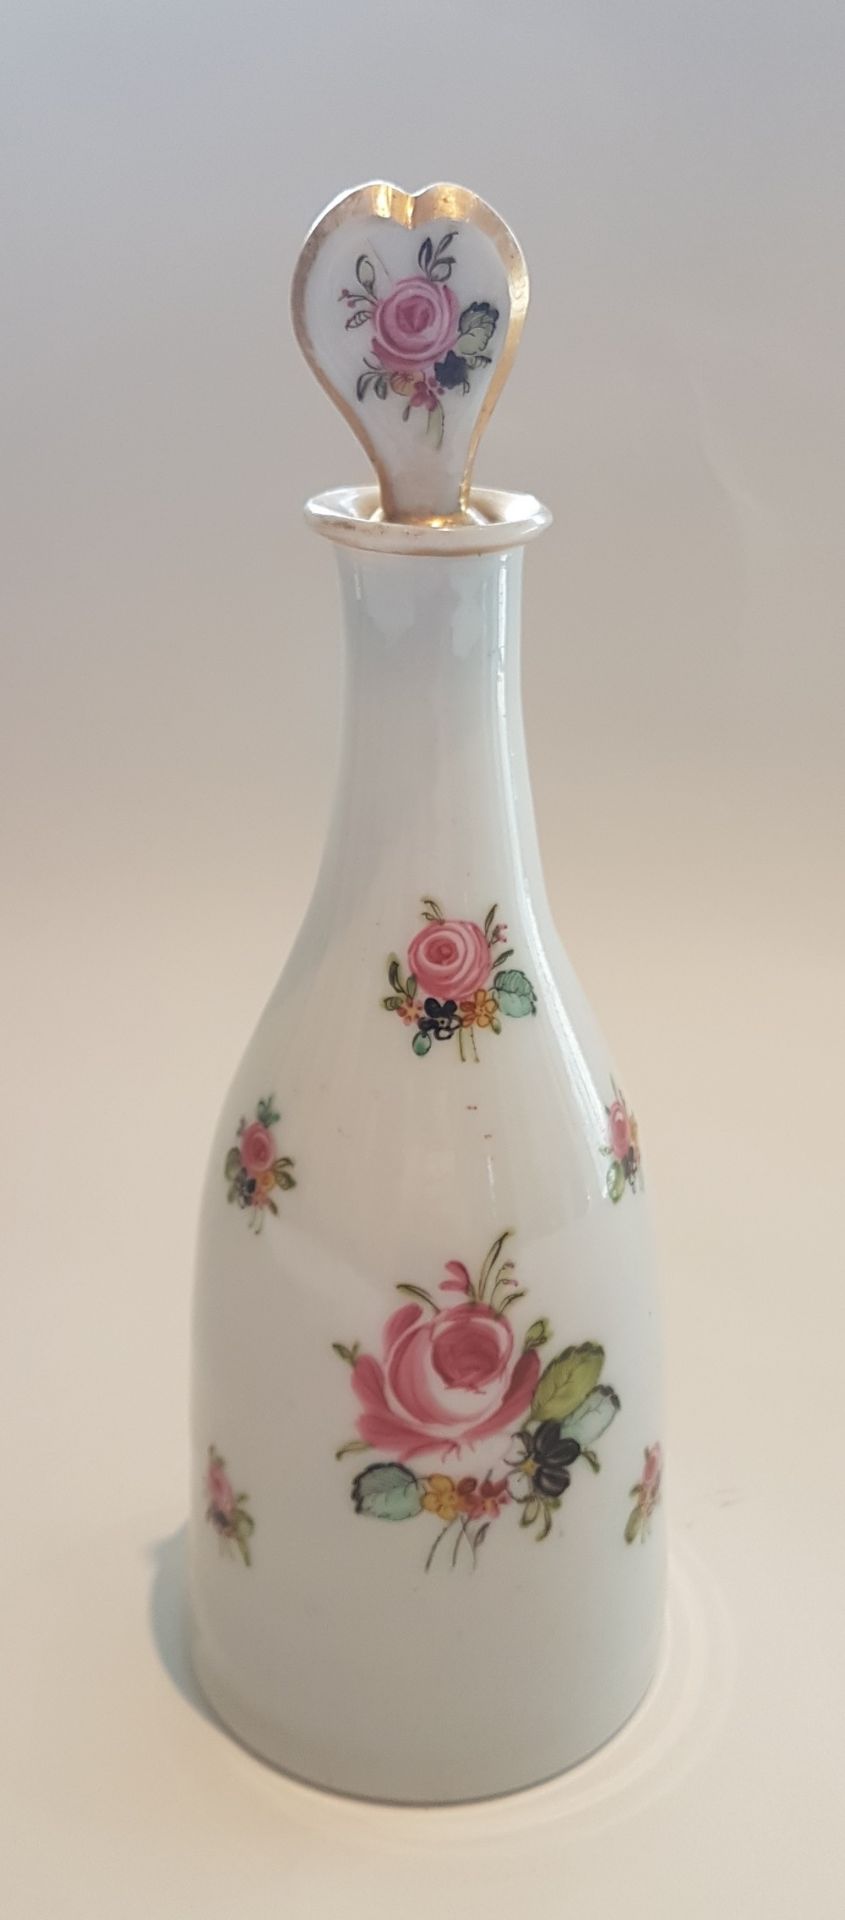 La Granja factory, Spain, 18th century.Opaline glass carafe with its heart-shaped stopper; - Image 2 of 4